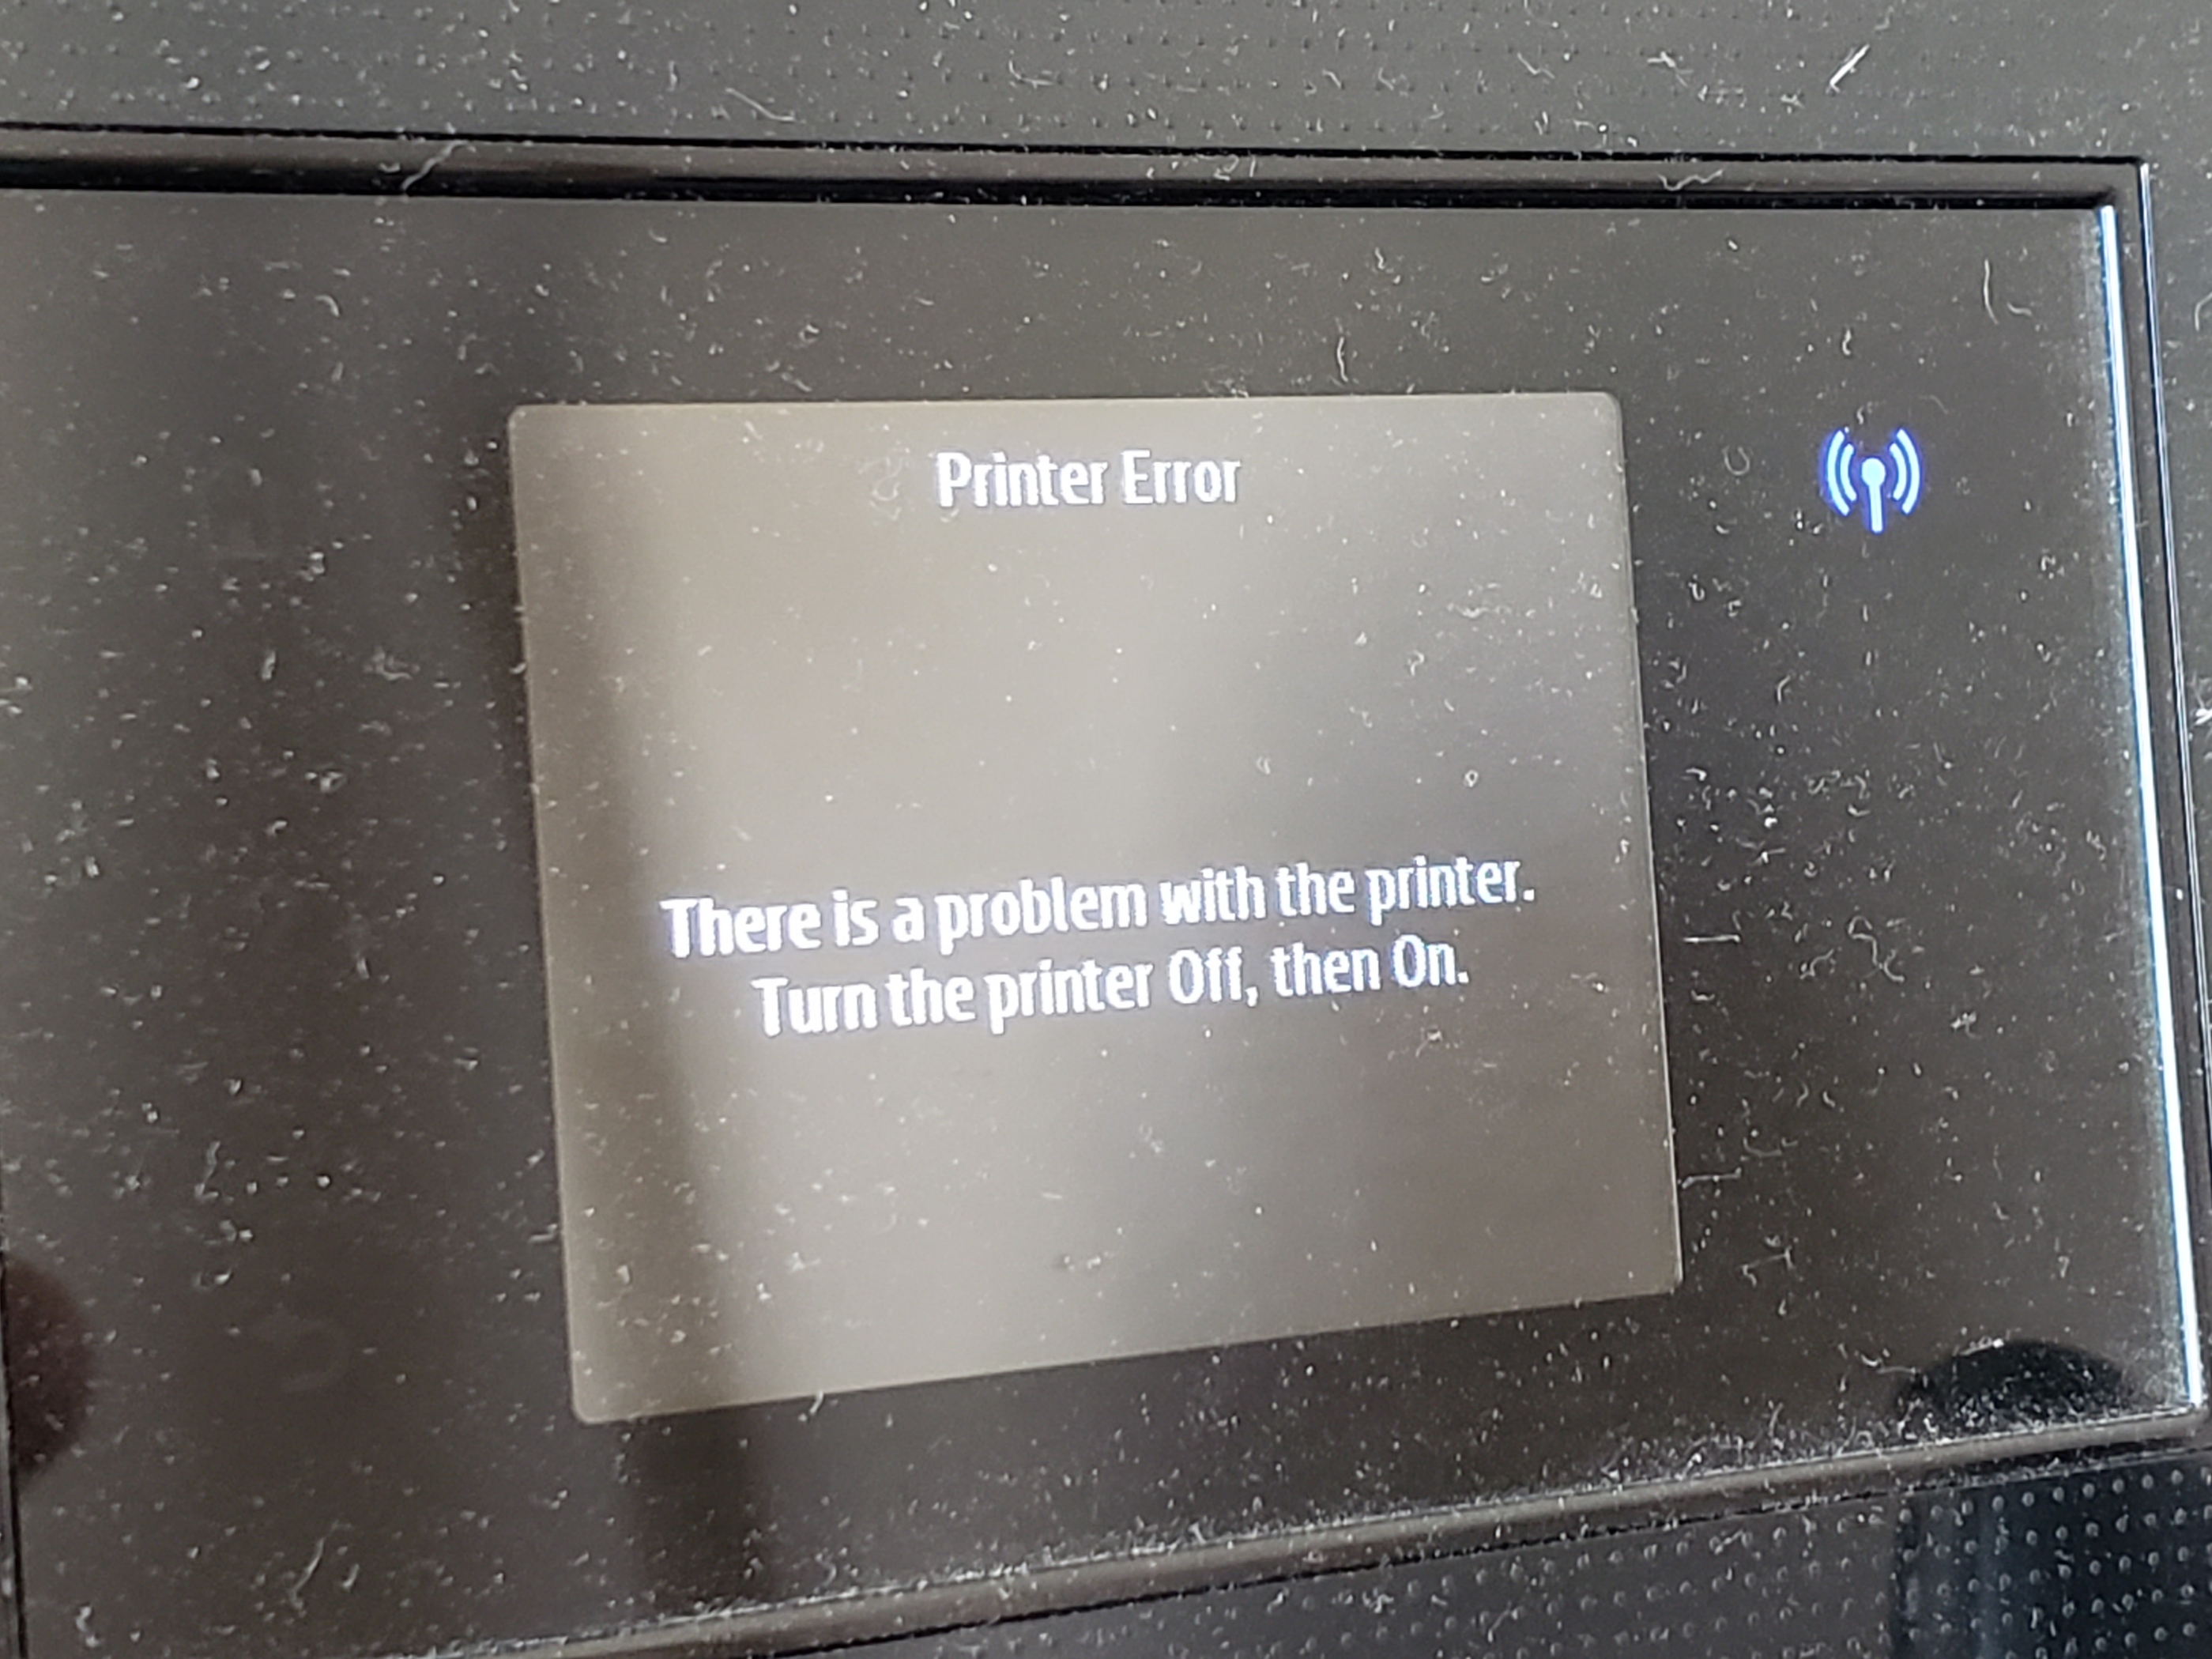 HP Printers - An 'Out of Paper' error displays, printer does not